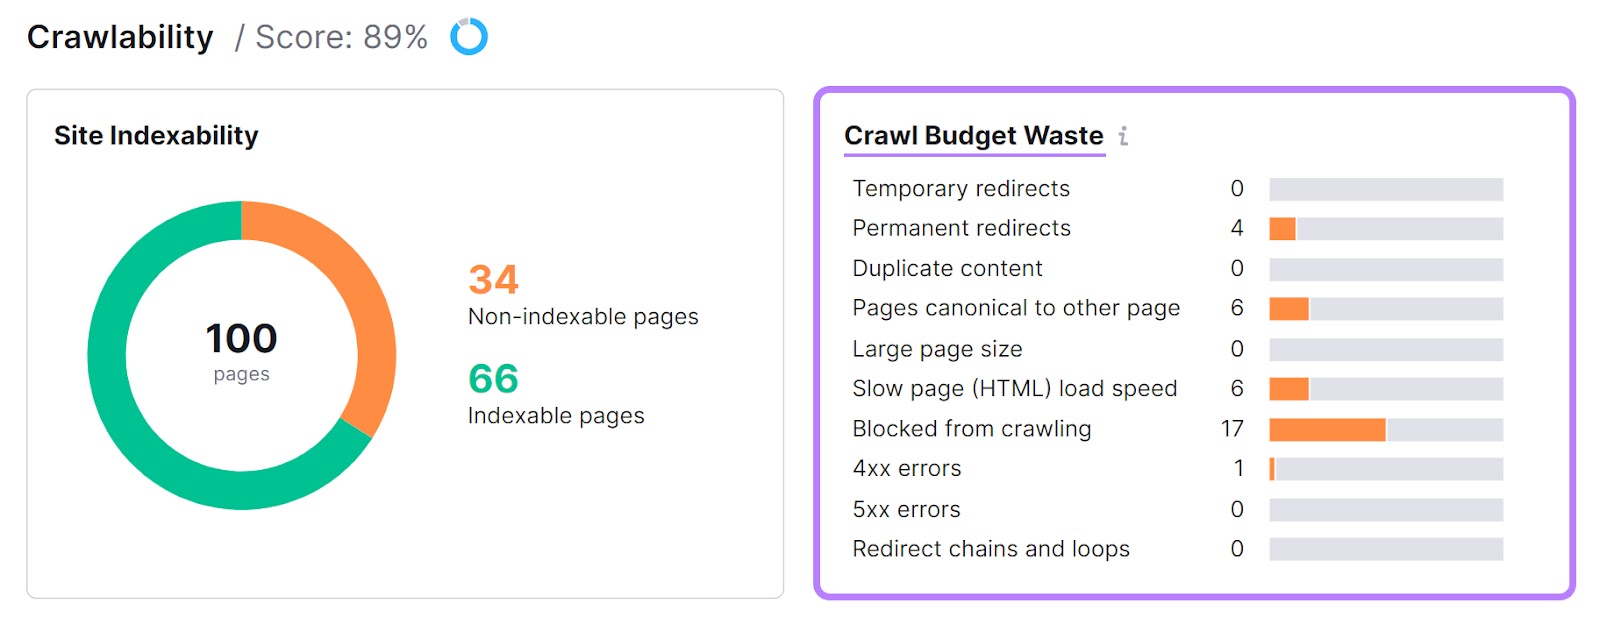 “Crawl Budget Waste” report section highlighted